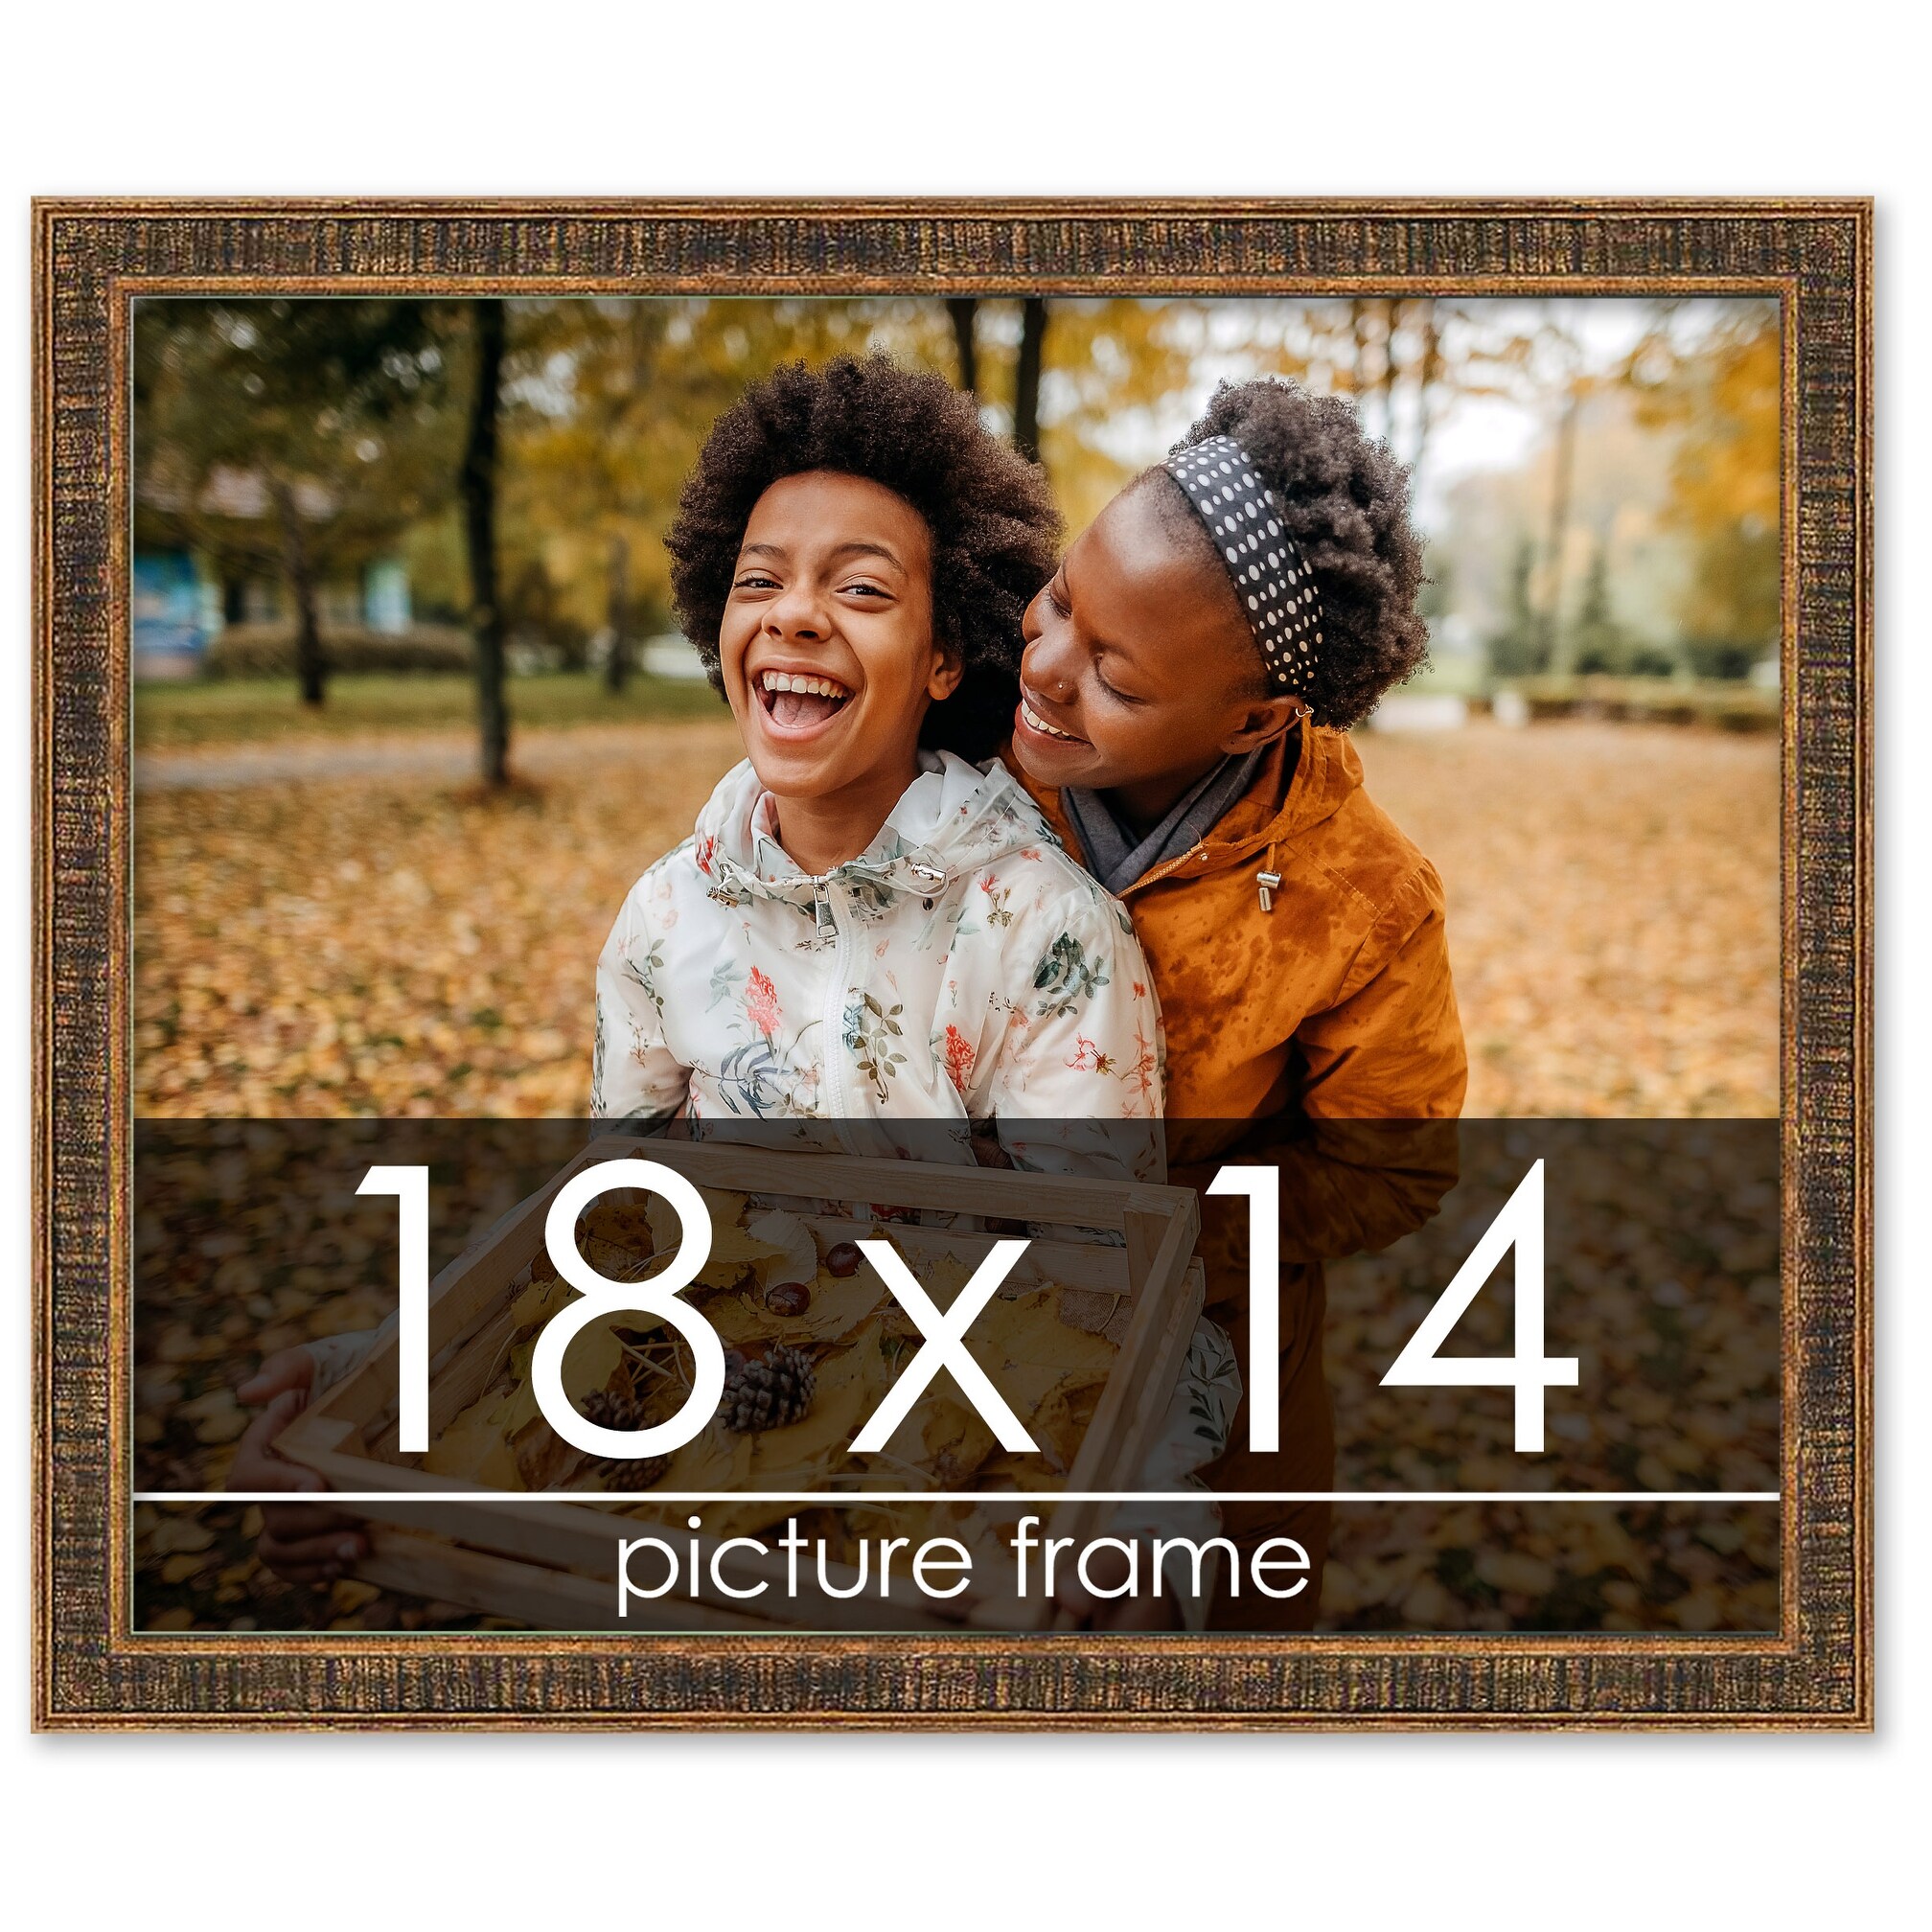 8 x 10 White MDF Wood Multi-Pack Picture Frames with Molded